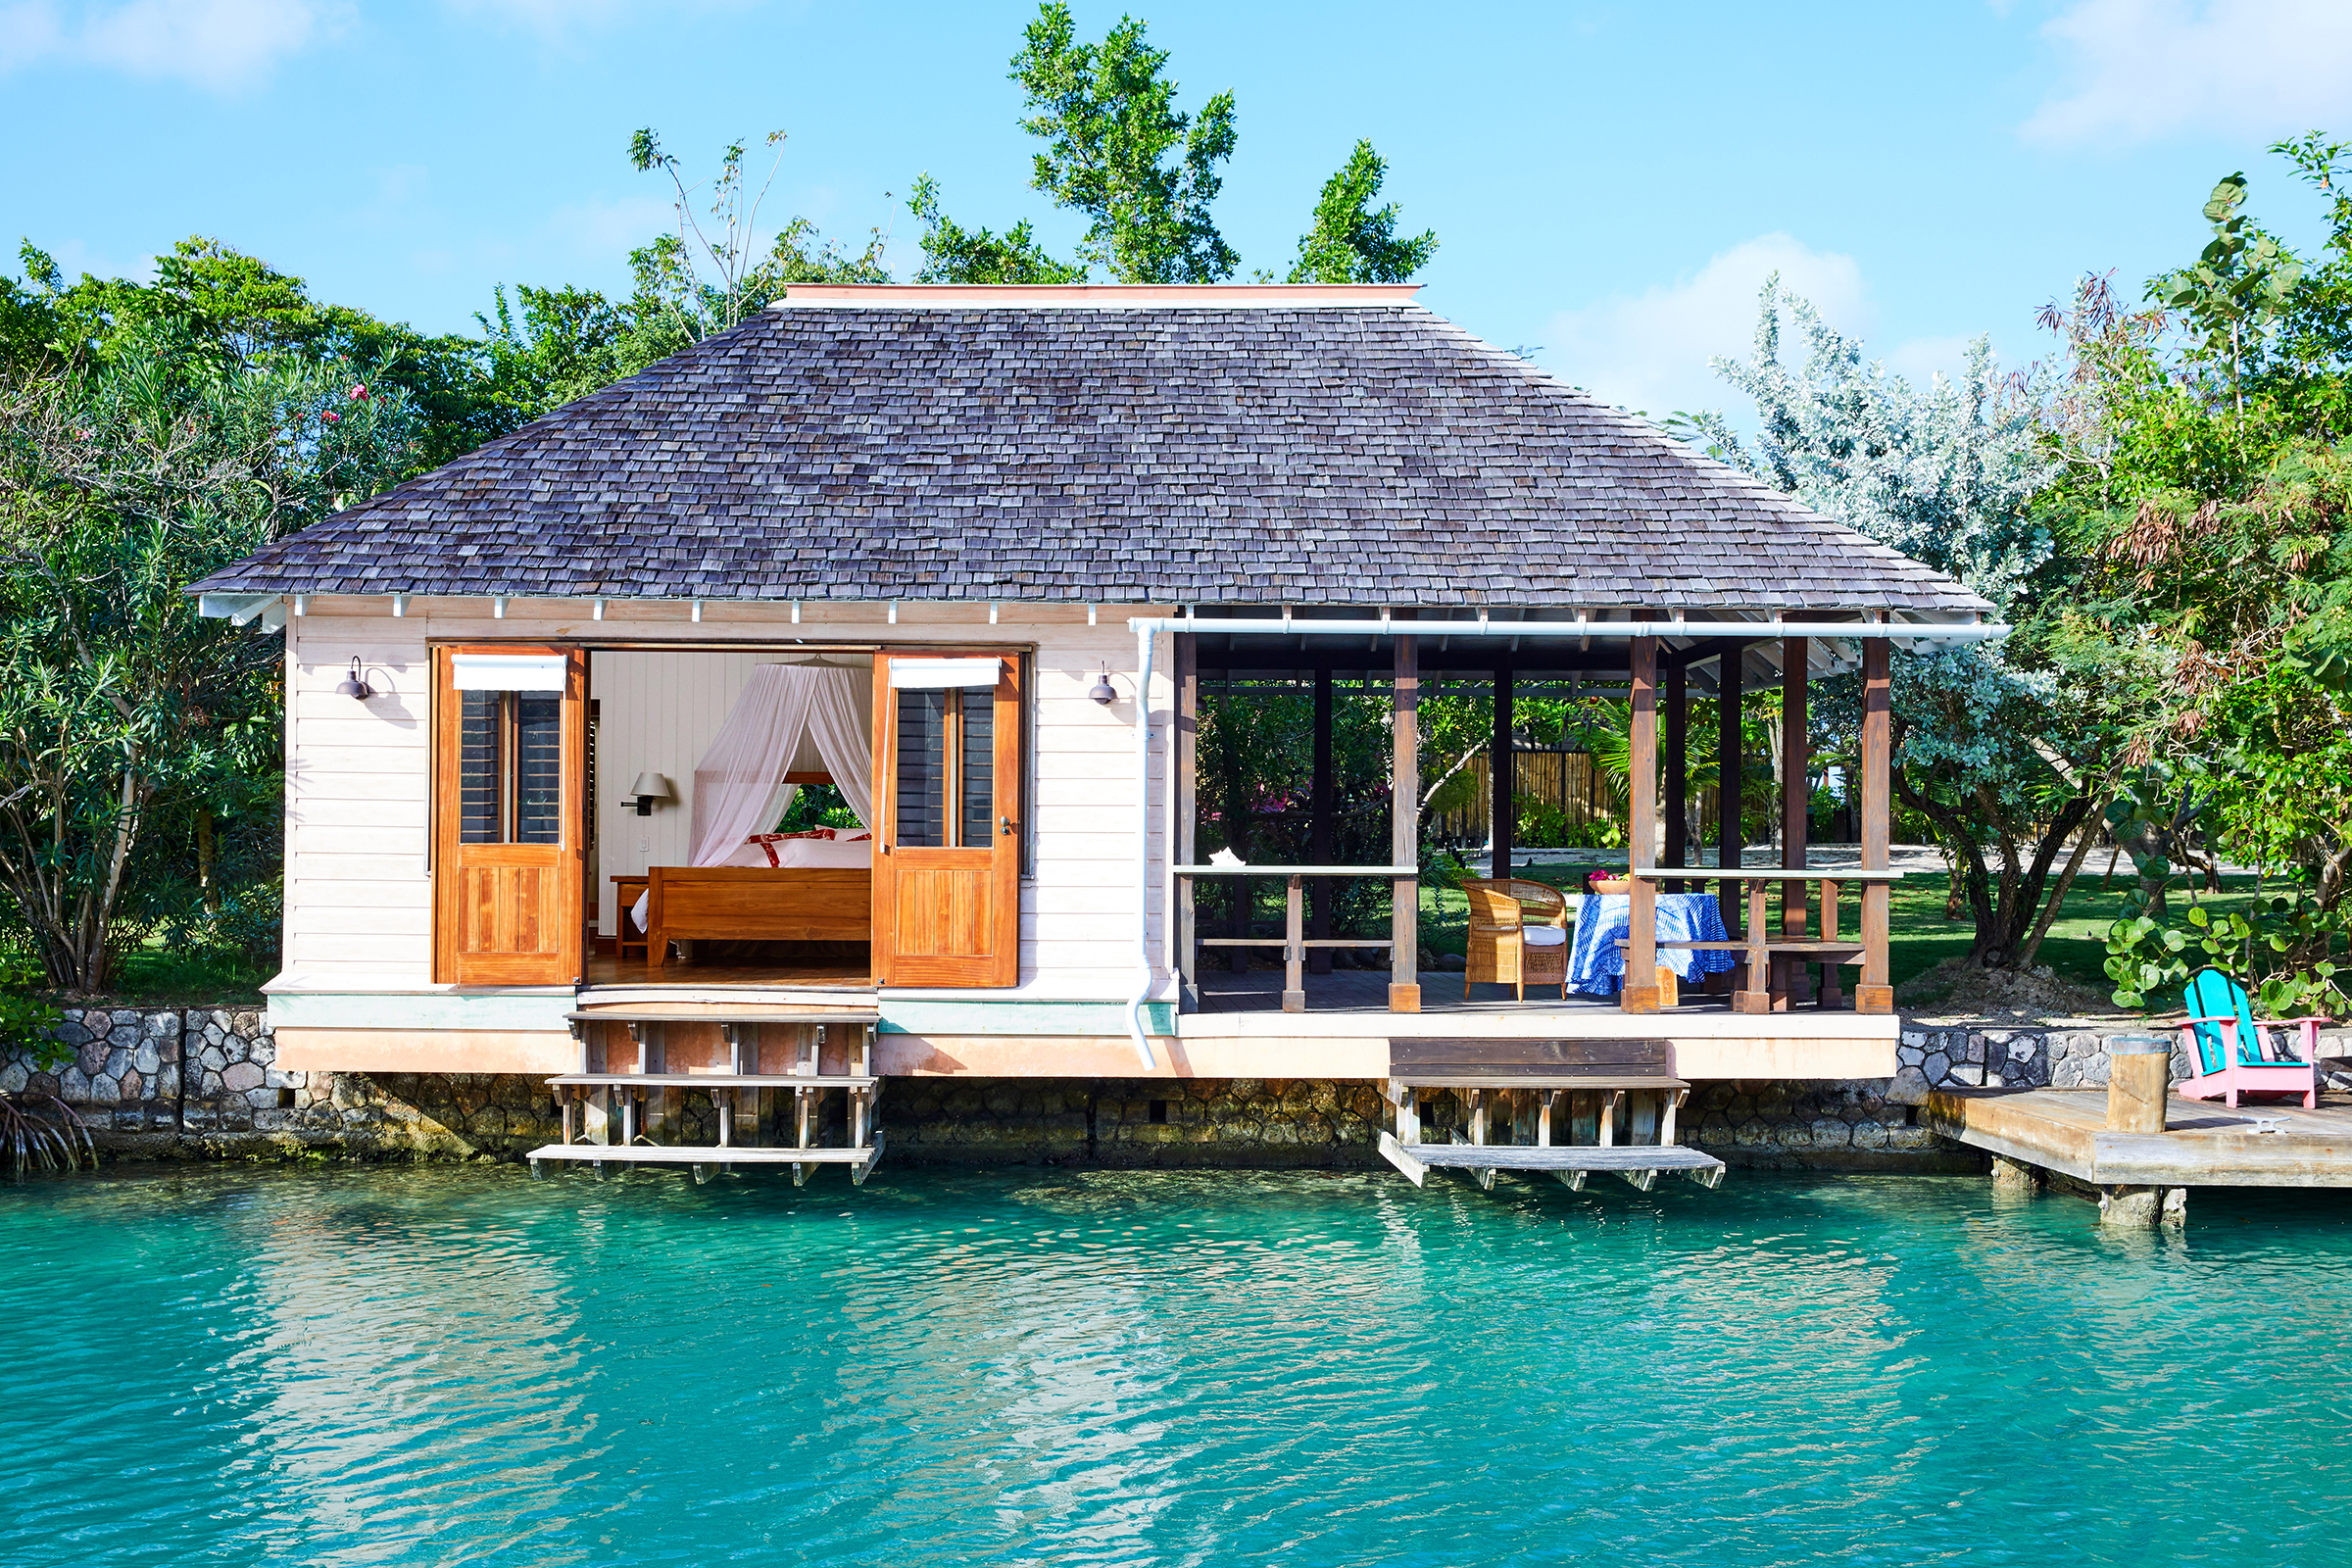 The lagoon cottage that sits on the water at the Goldeneye Resort.